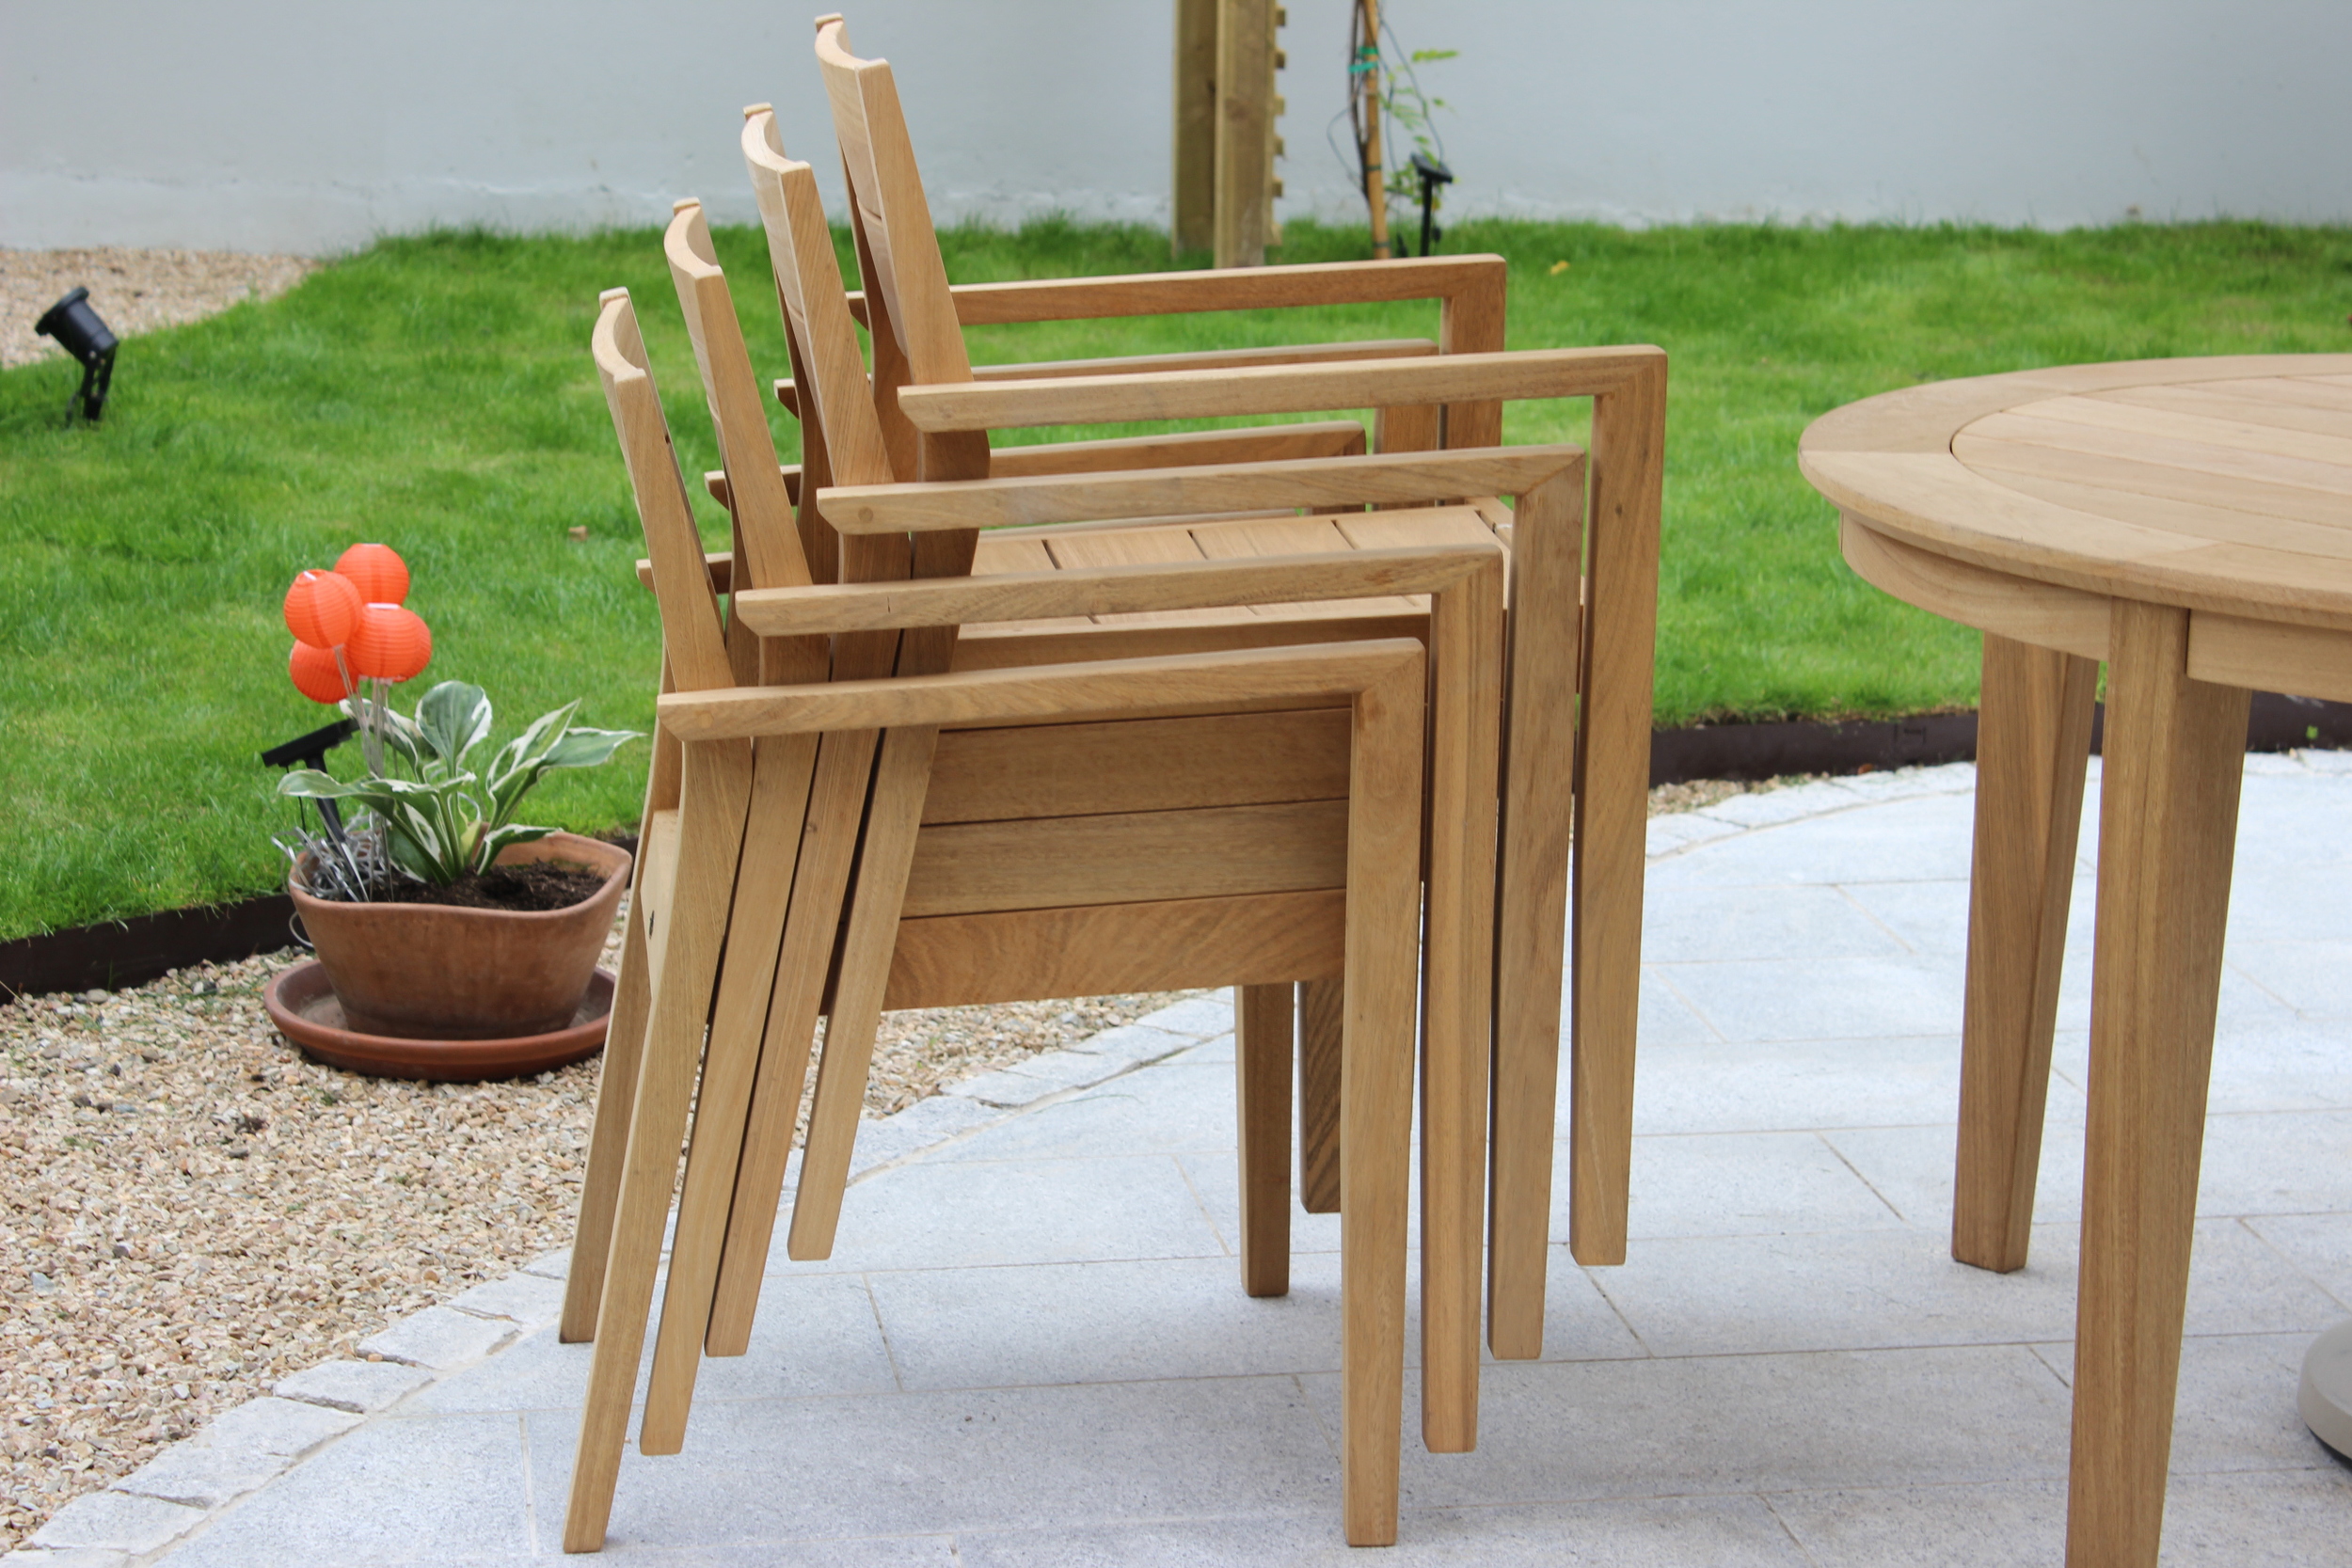 stacked Garden chairs